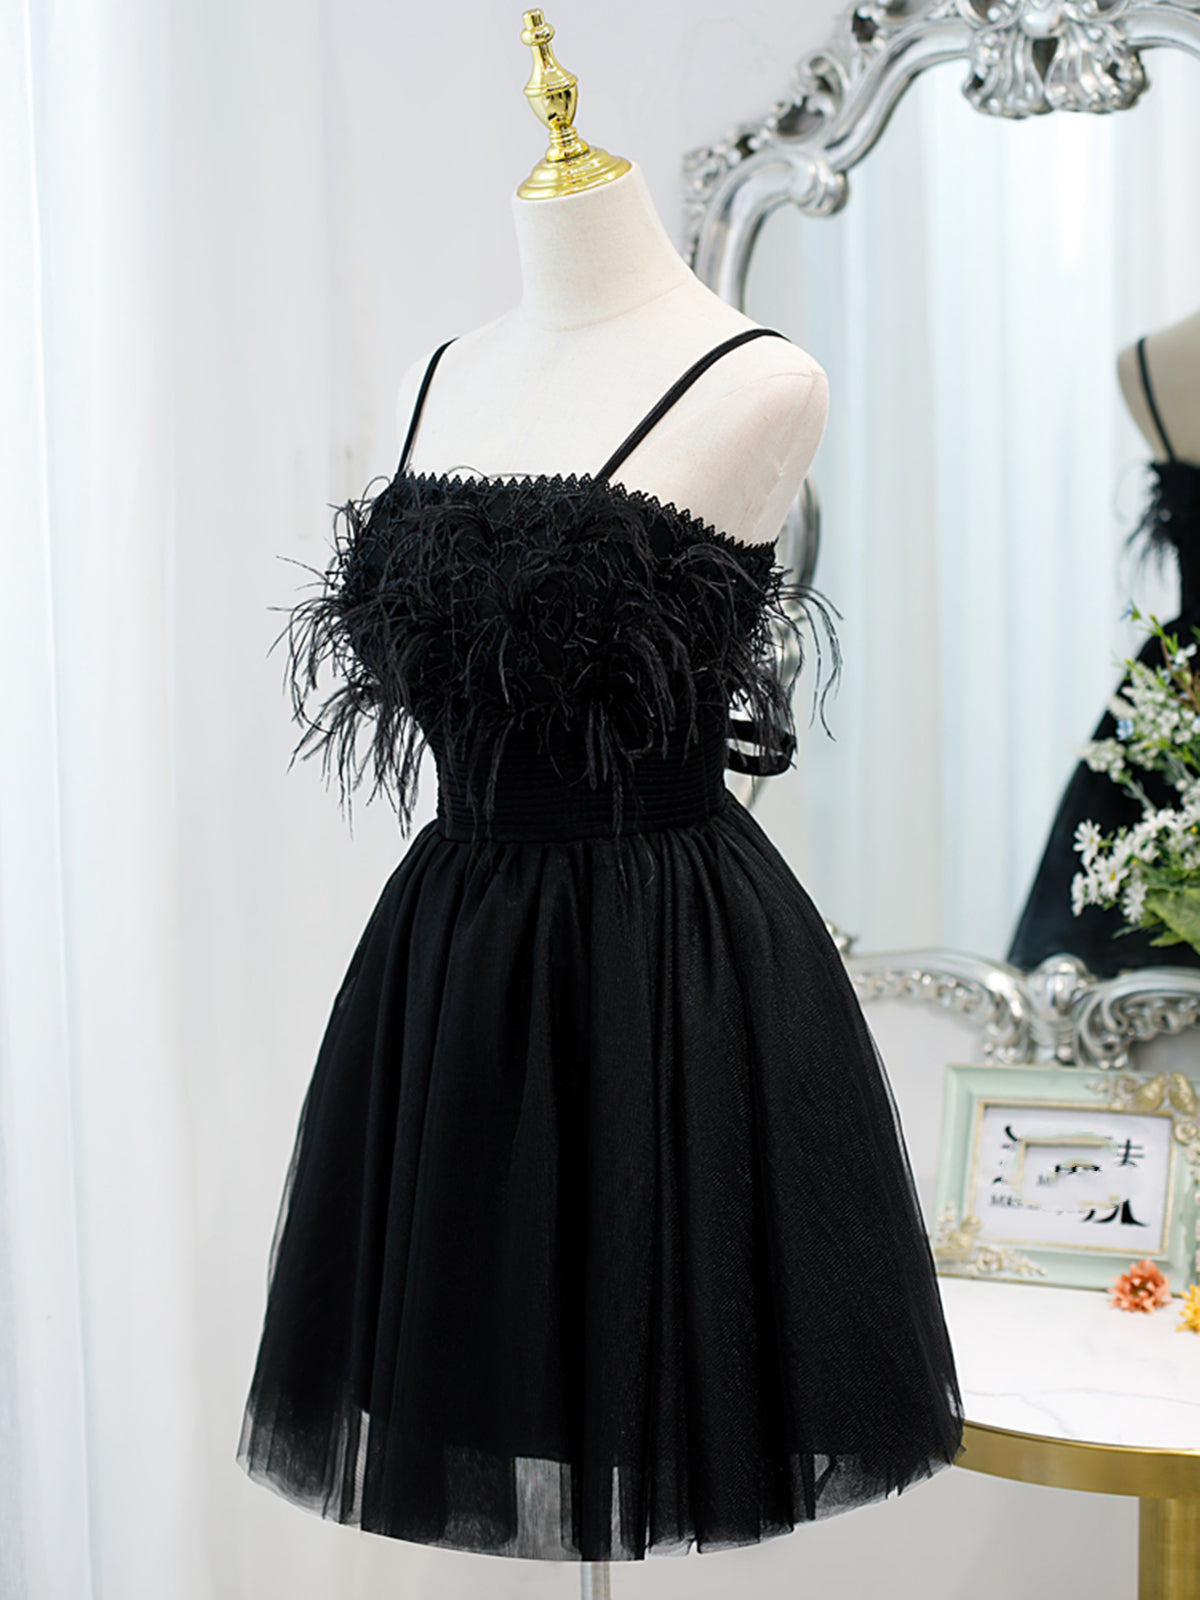 Evening Dresses With Sleeves, Short Back Prom Dress with Corset Back, Little Black Formal Homecoming Dresses